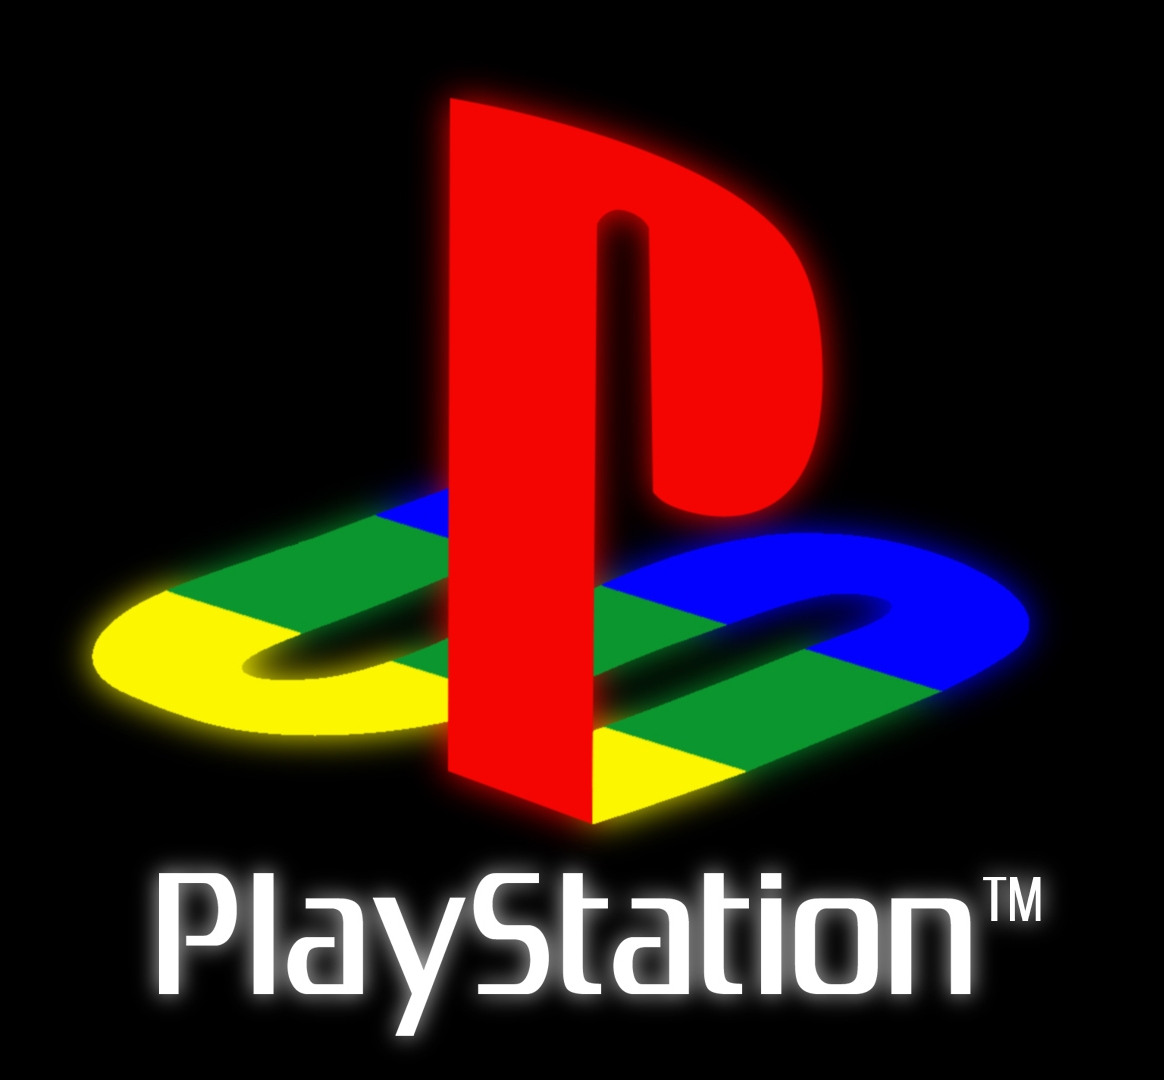 Playstation 1 And 2 On Linux Linux Org